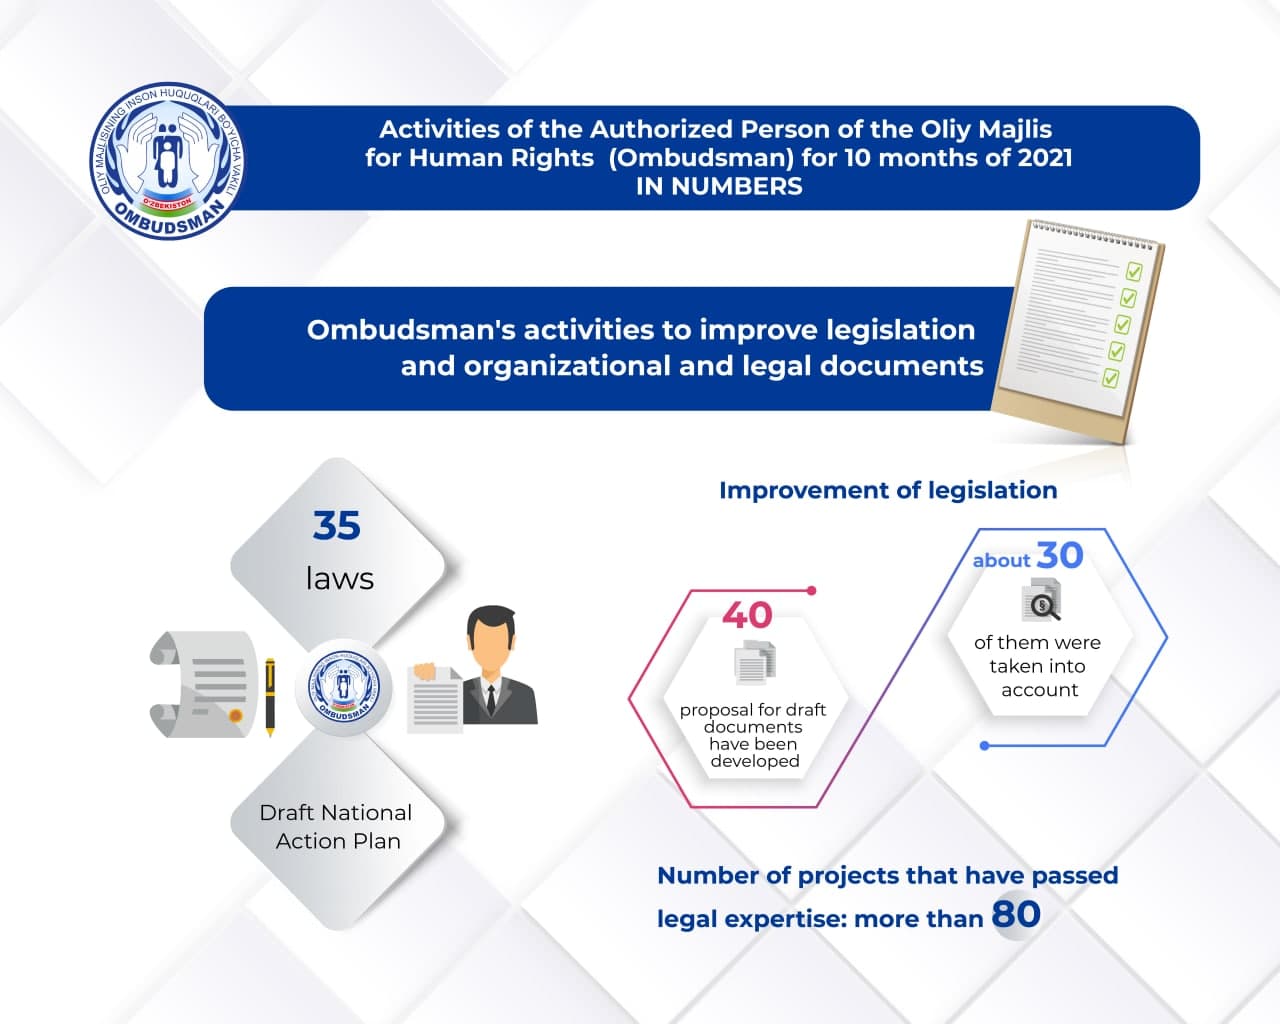 Activities of the Authorized Person of the Oliy Majlis for Human Rights (Ombudsman) for 10 months of 2021 IN NUMBERS